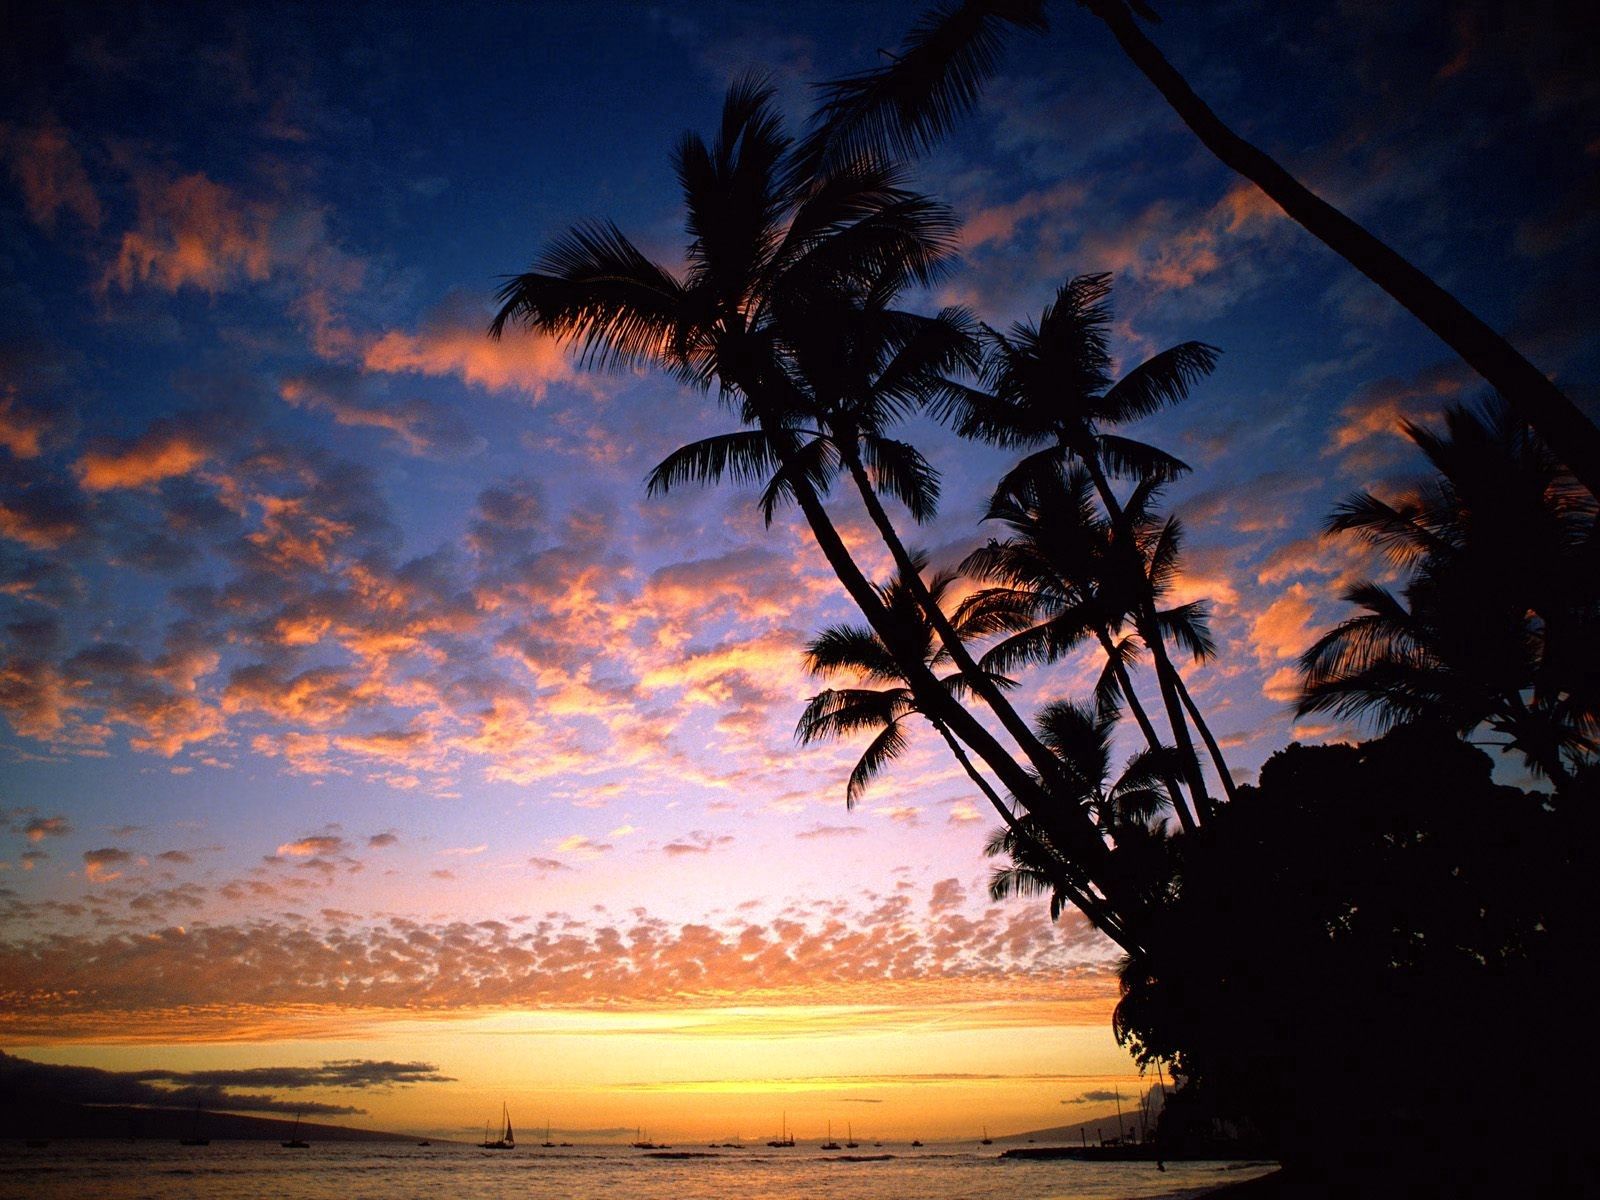 bank, nature, sky, ships, sea, palms, shore, silhouettes, outlines, evening, hawaii